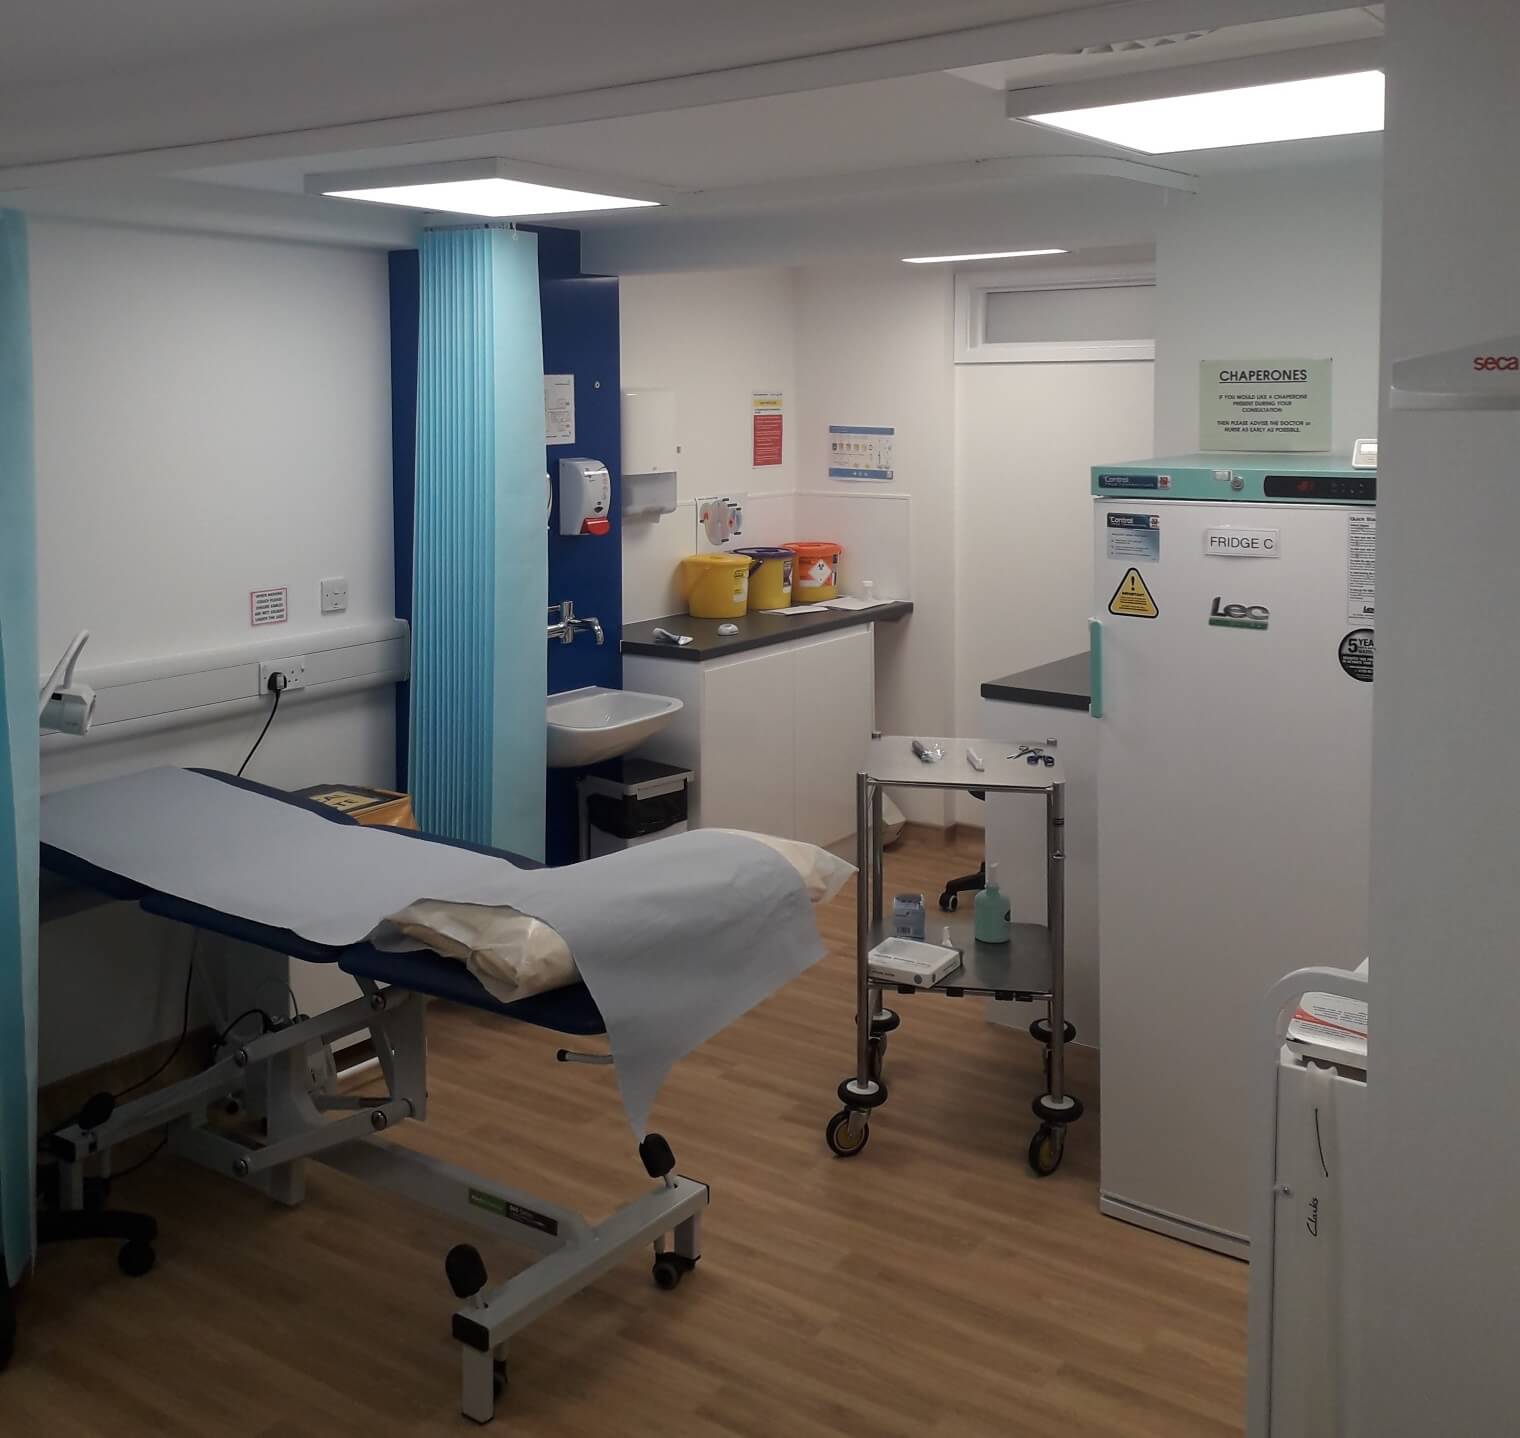 £170k refurbishment and reconfiguration to create additional clinical rooms